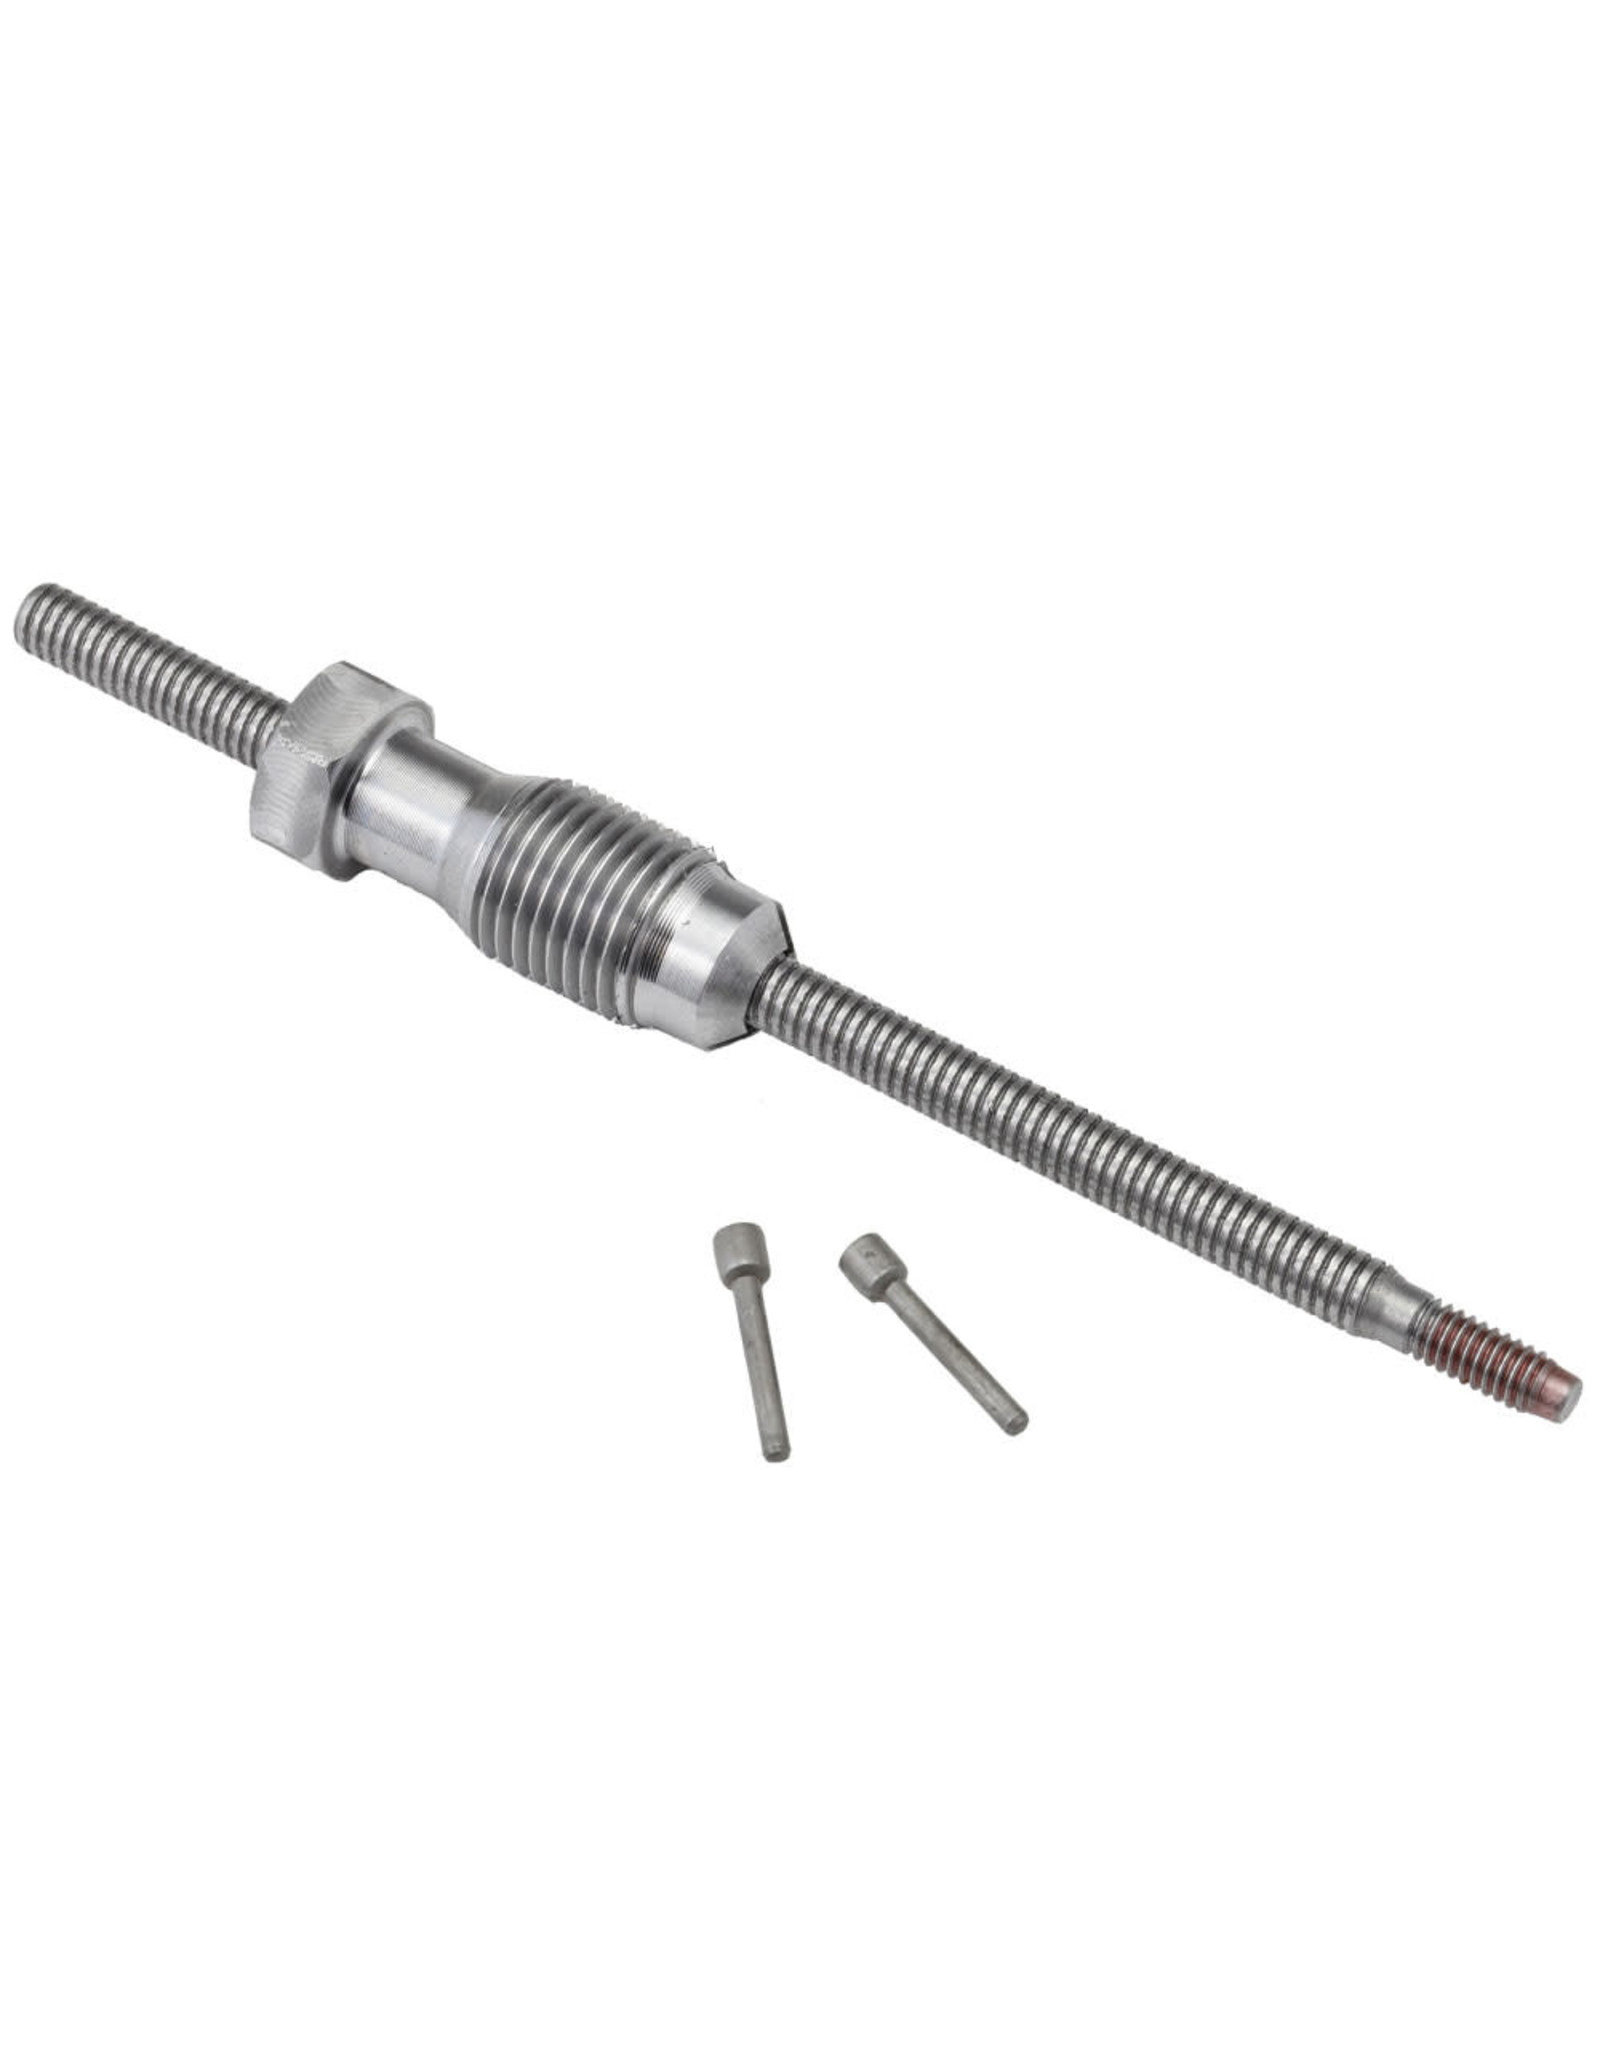 Hornady Zip Spindle Kit - Multi Cal (NOT .17 & .20)